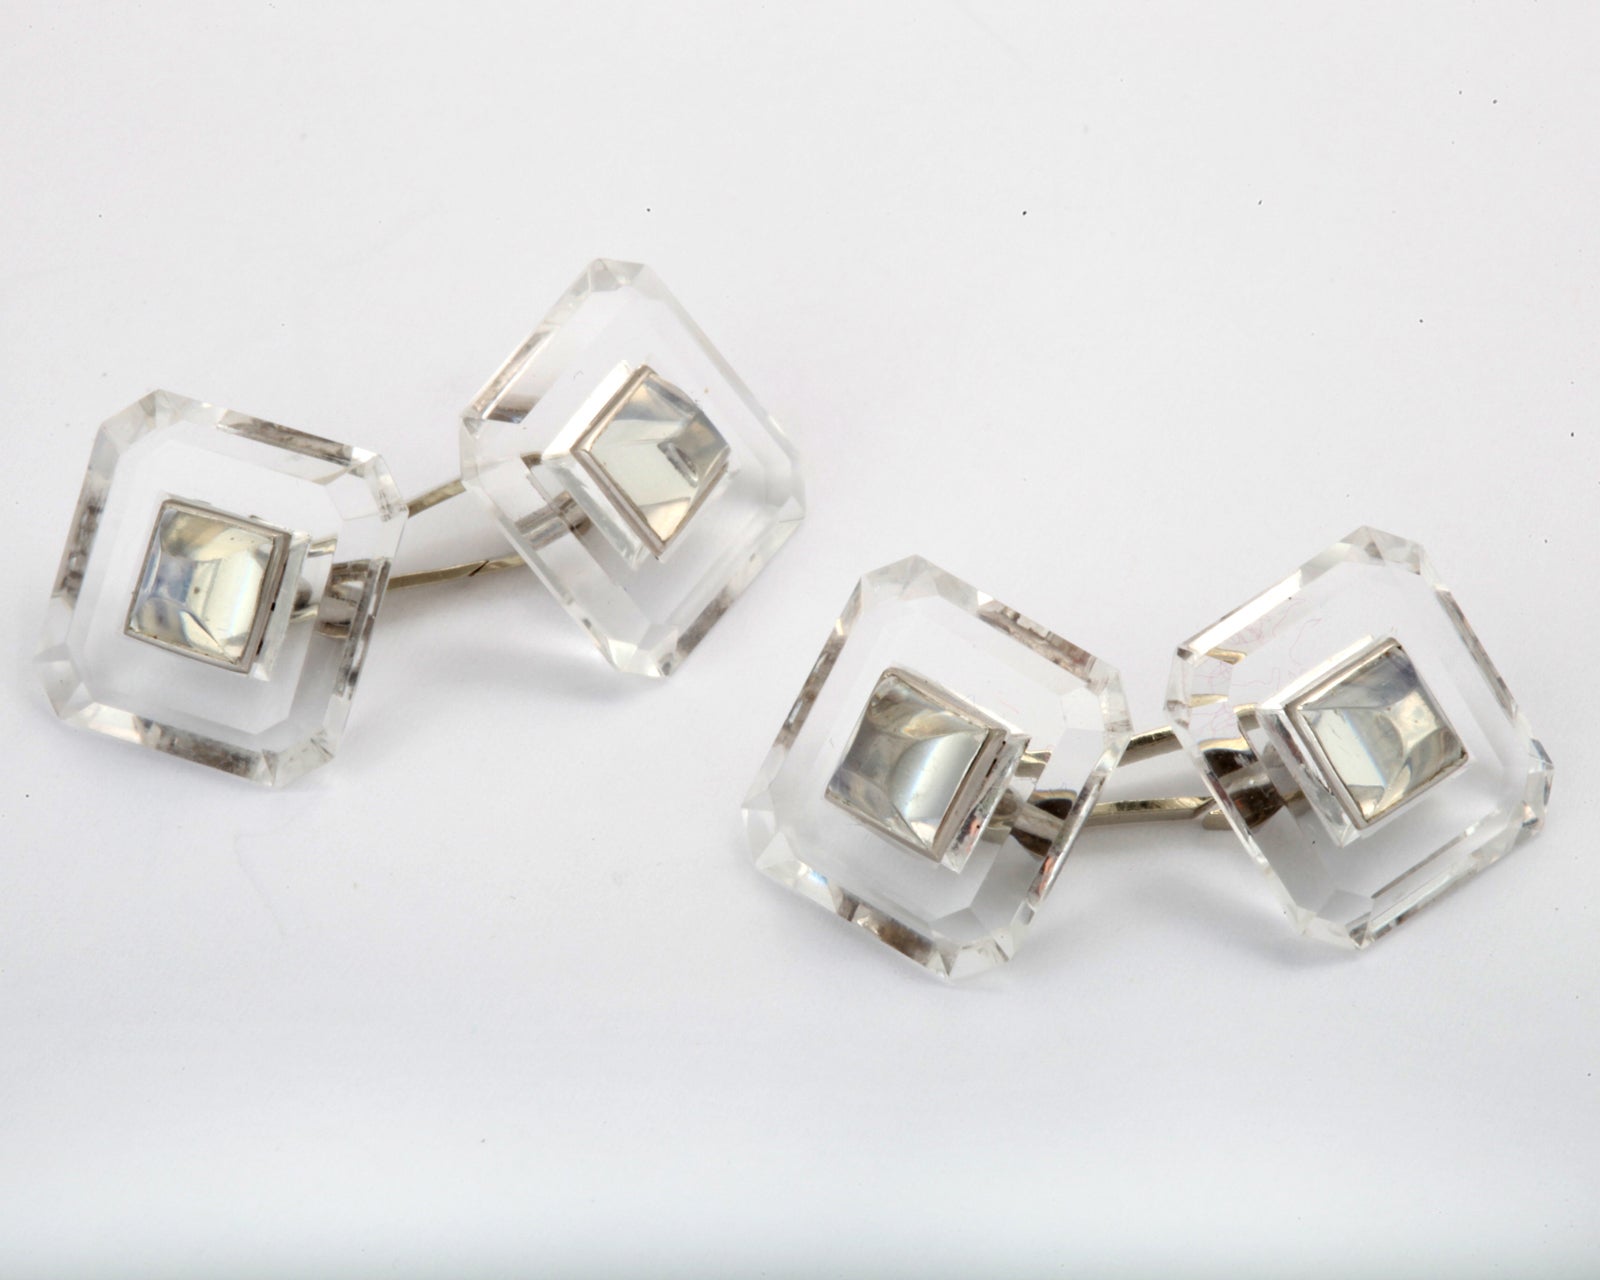 Beautifully cut rock crystal cuff links are set with carved moonstones. Superbly crafted and exceptionally stylish the cuff links are set with 14kt white gold fittings.